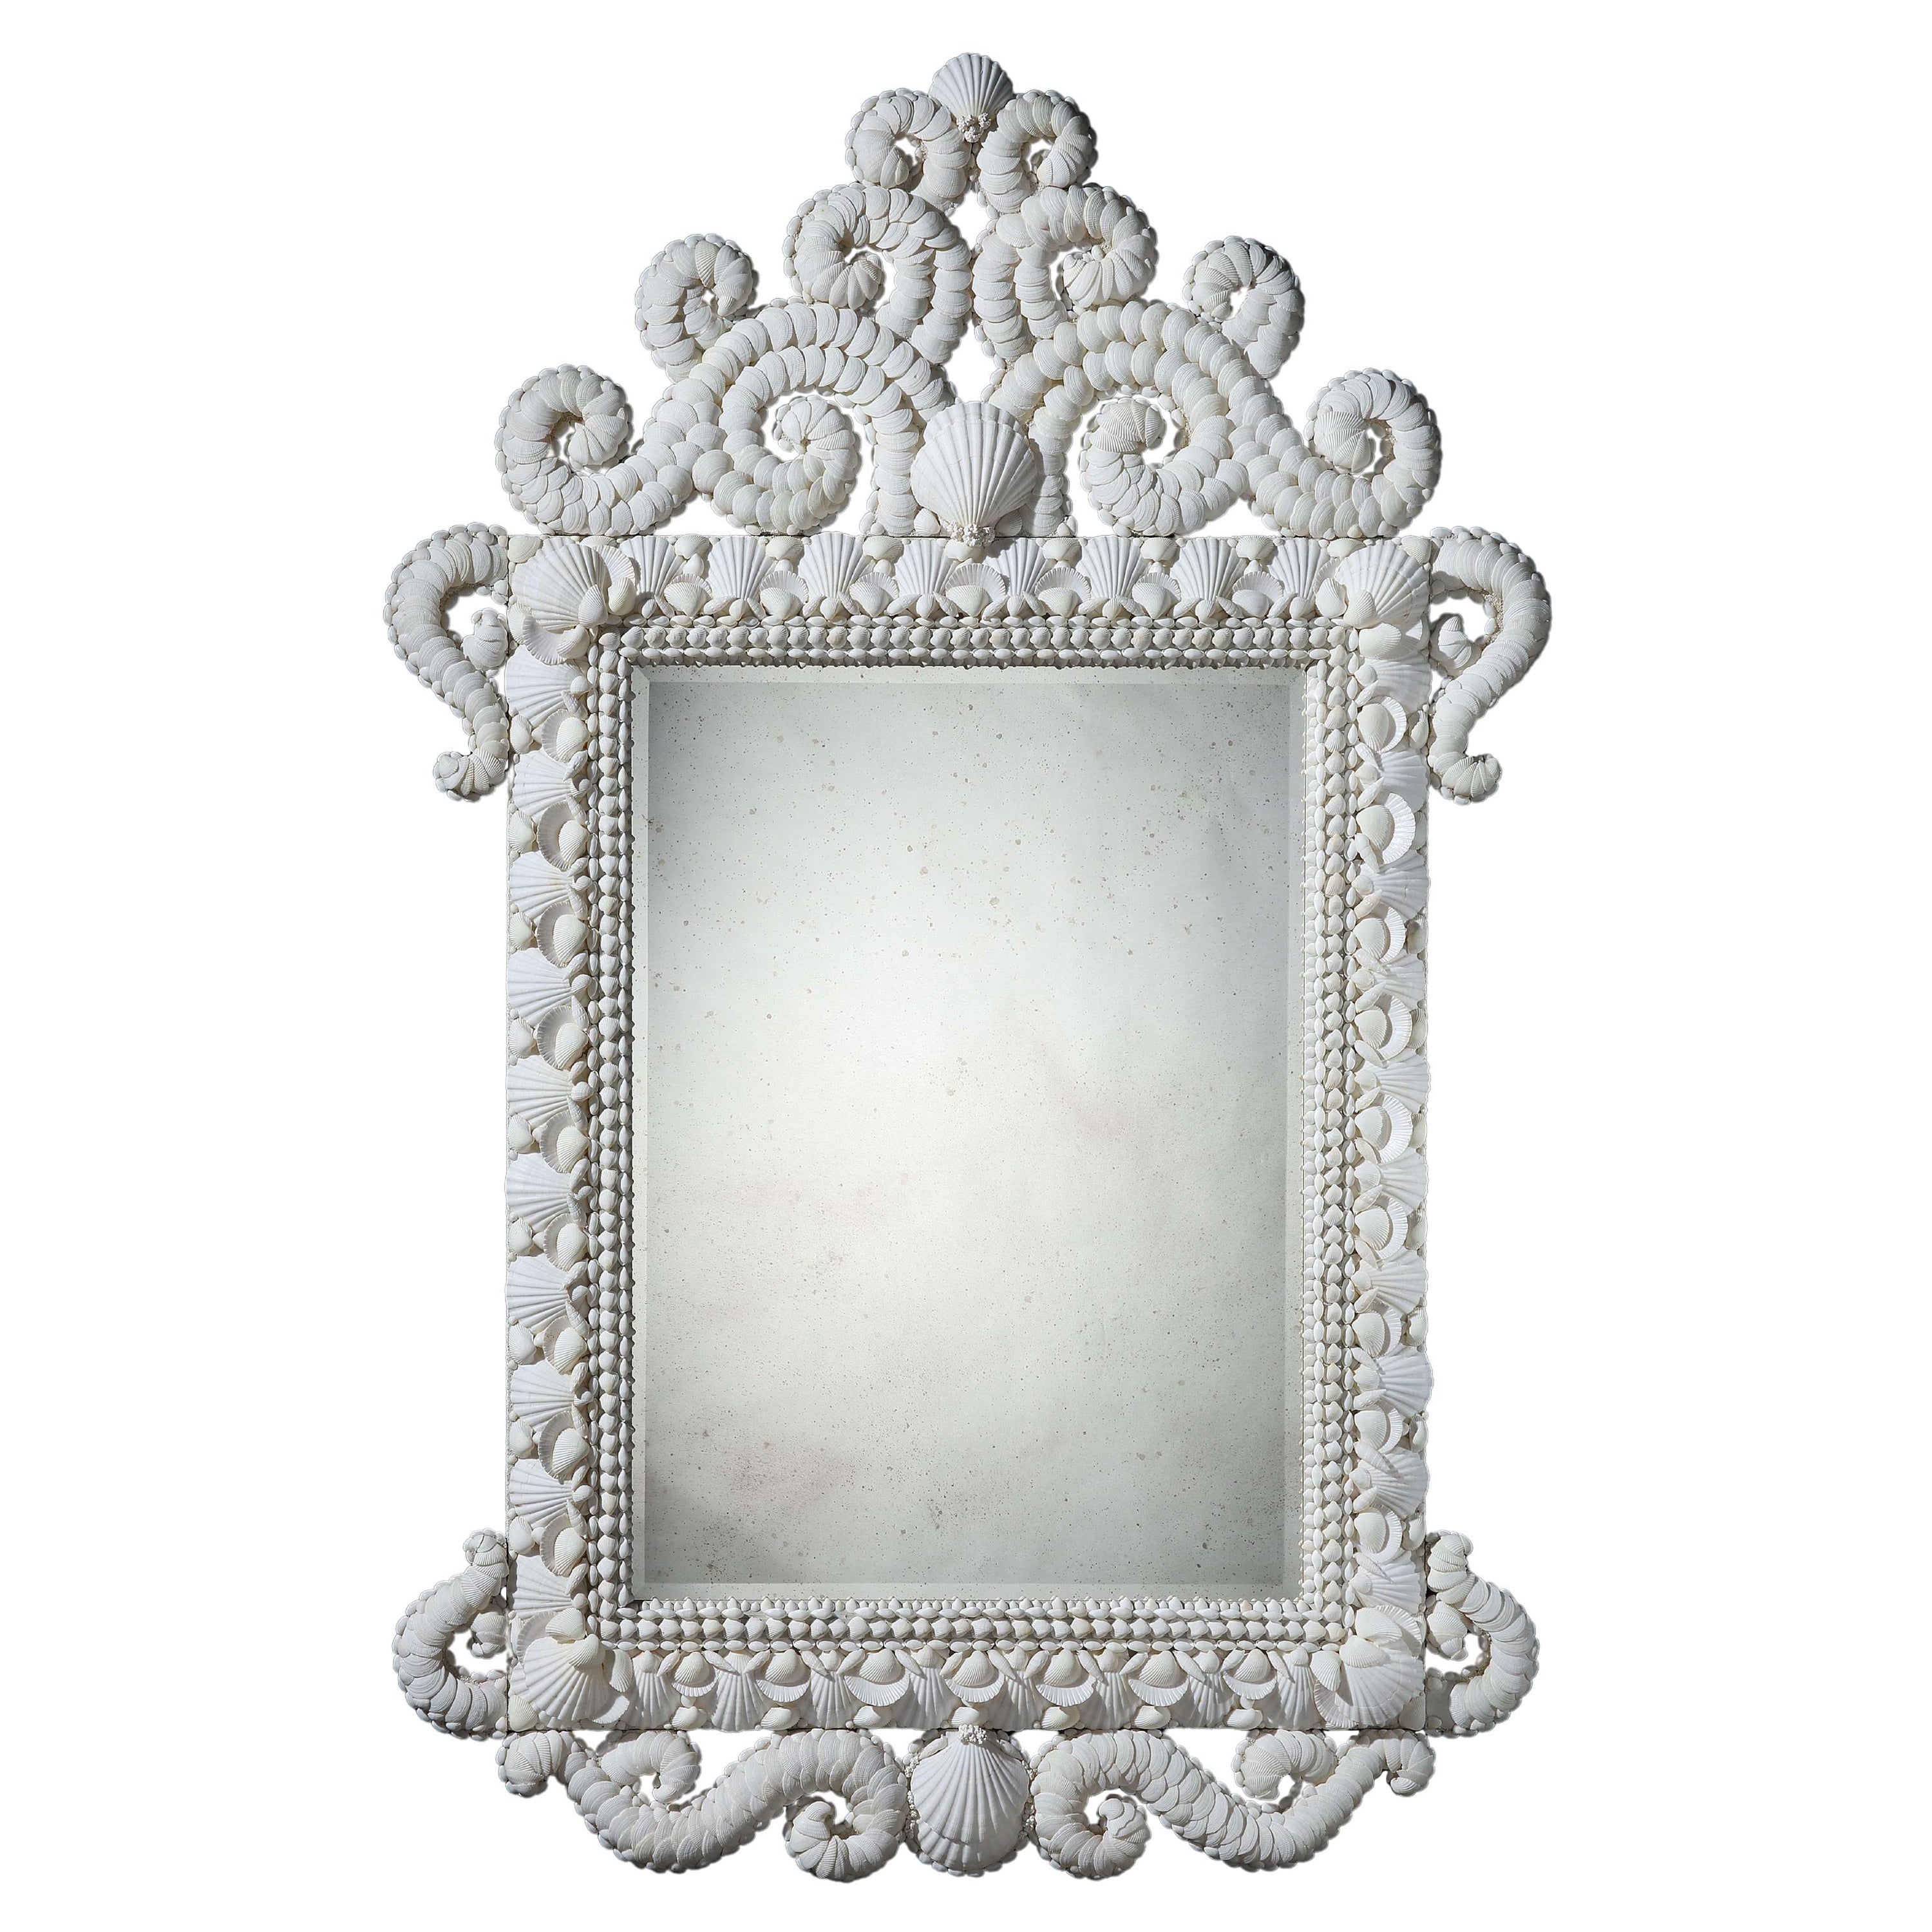 A Large White Shell Pier Mirror